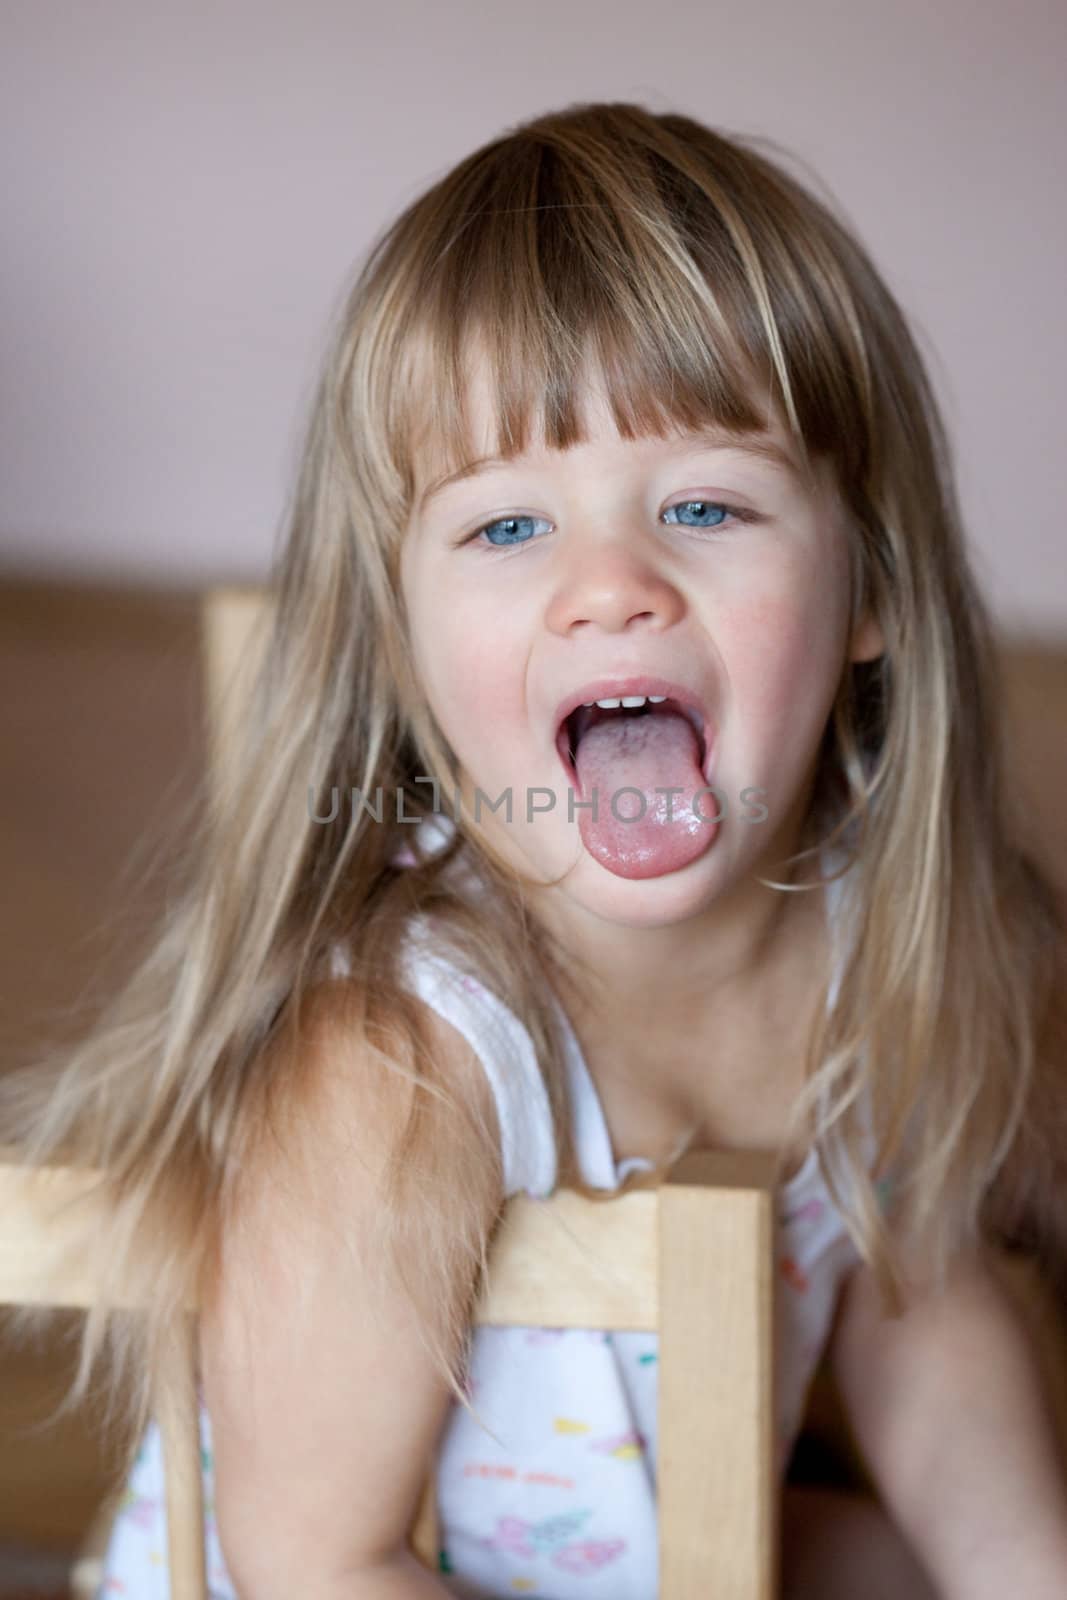 people series: little girl put out one's tongue